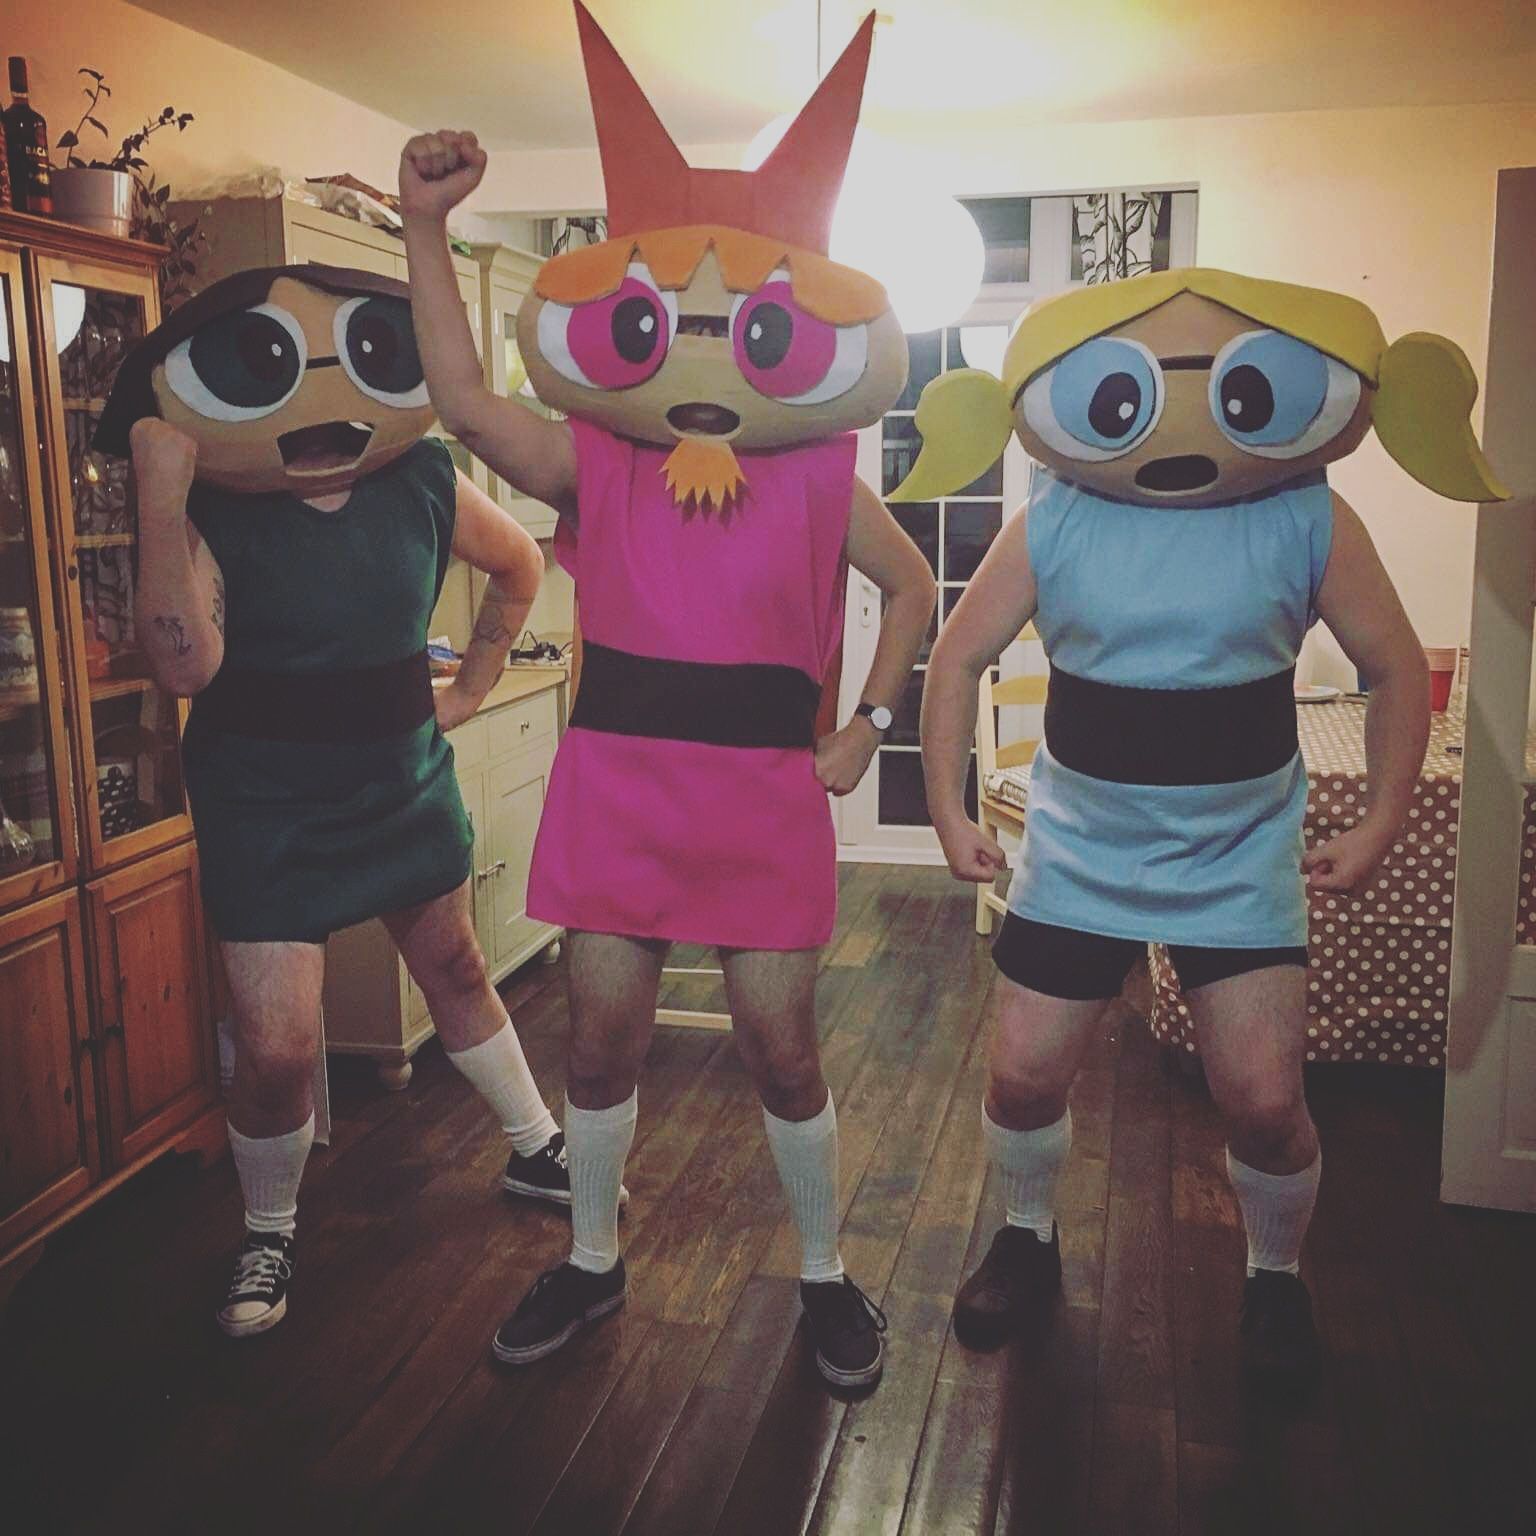 My friends and I as Powerpuffmen for Halloween!